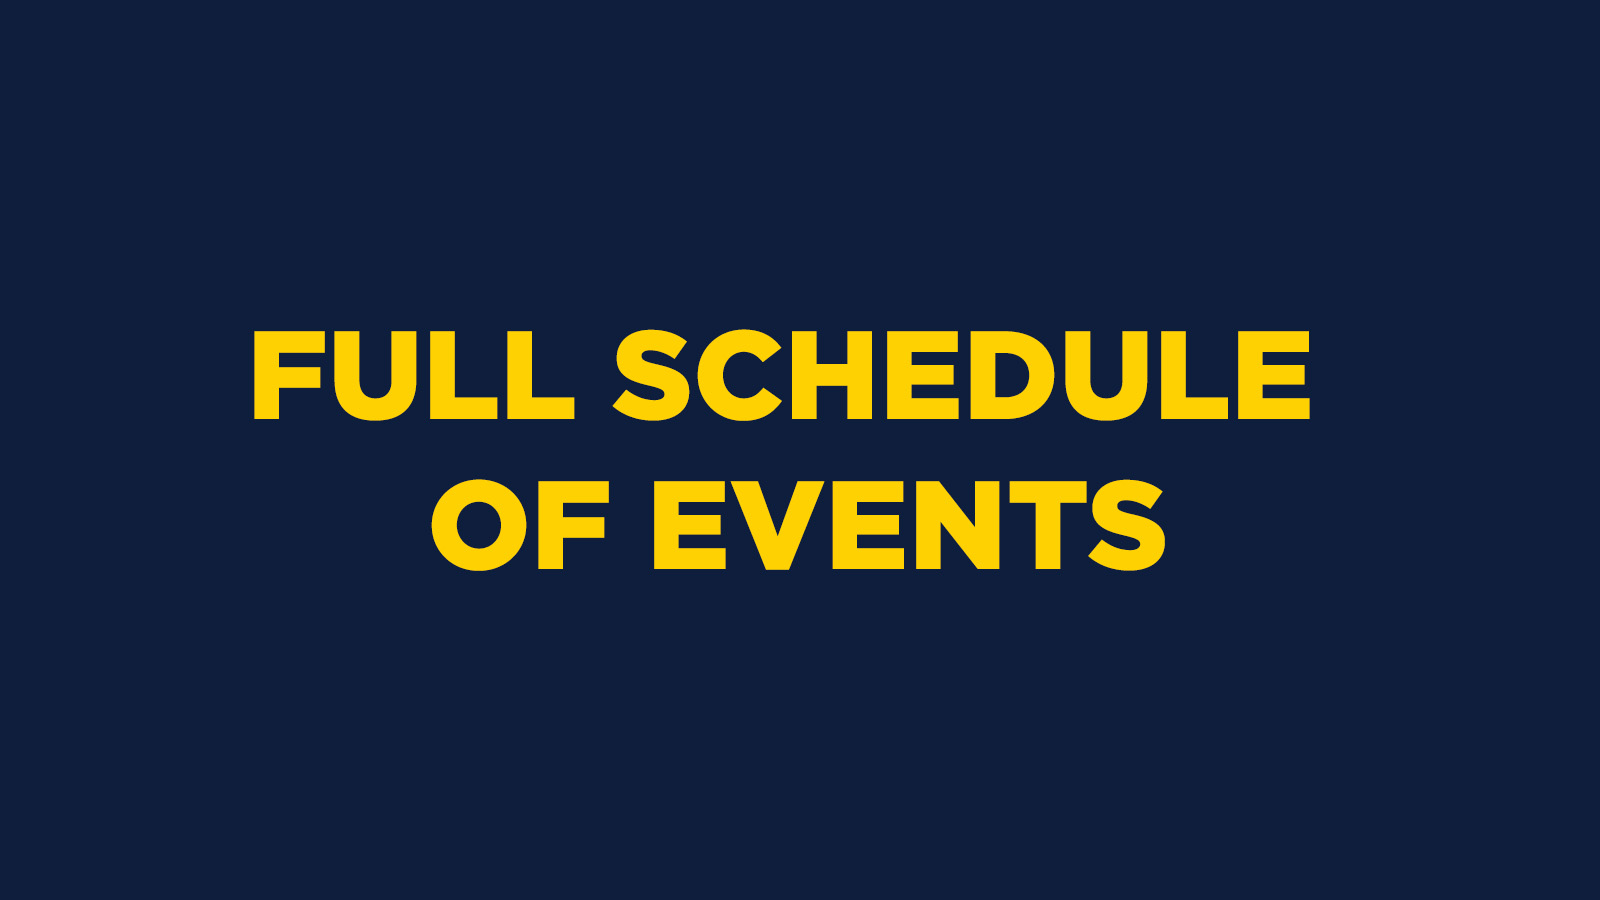 FULL SCHEDULE OF EVENTS